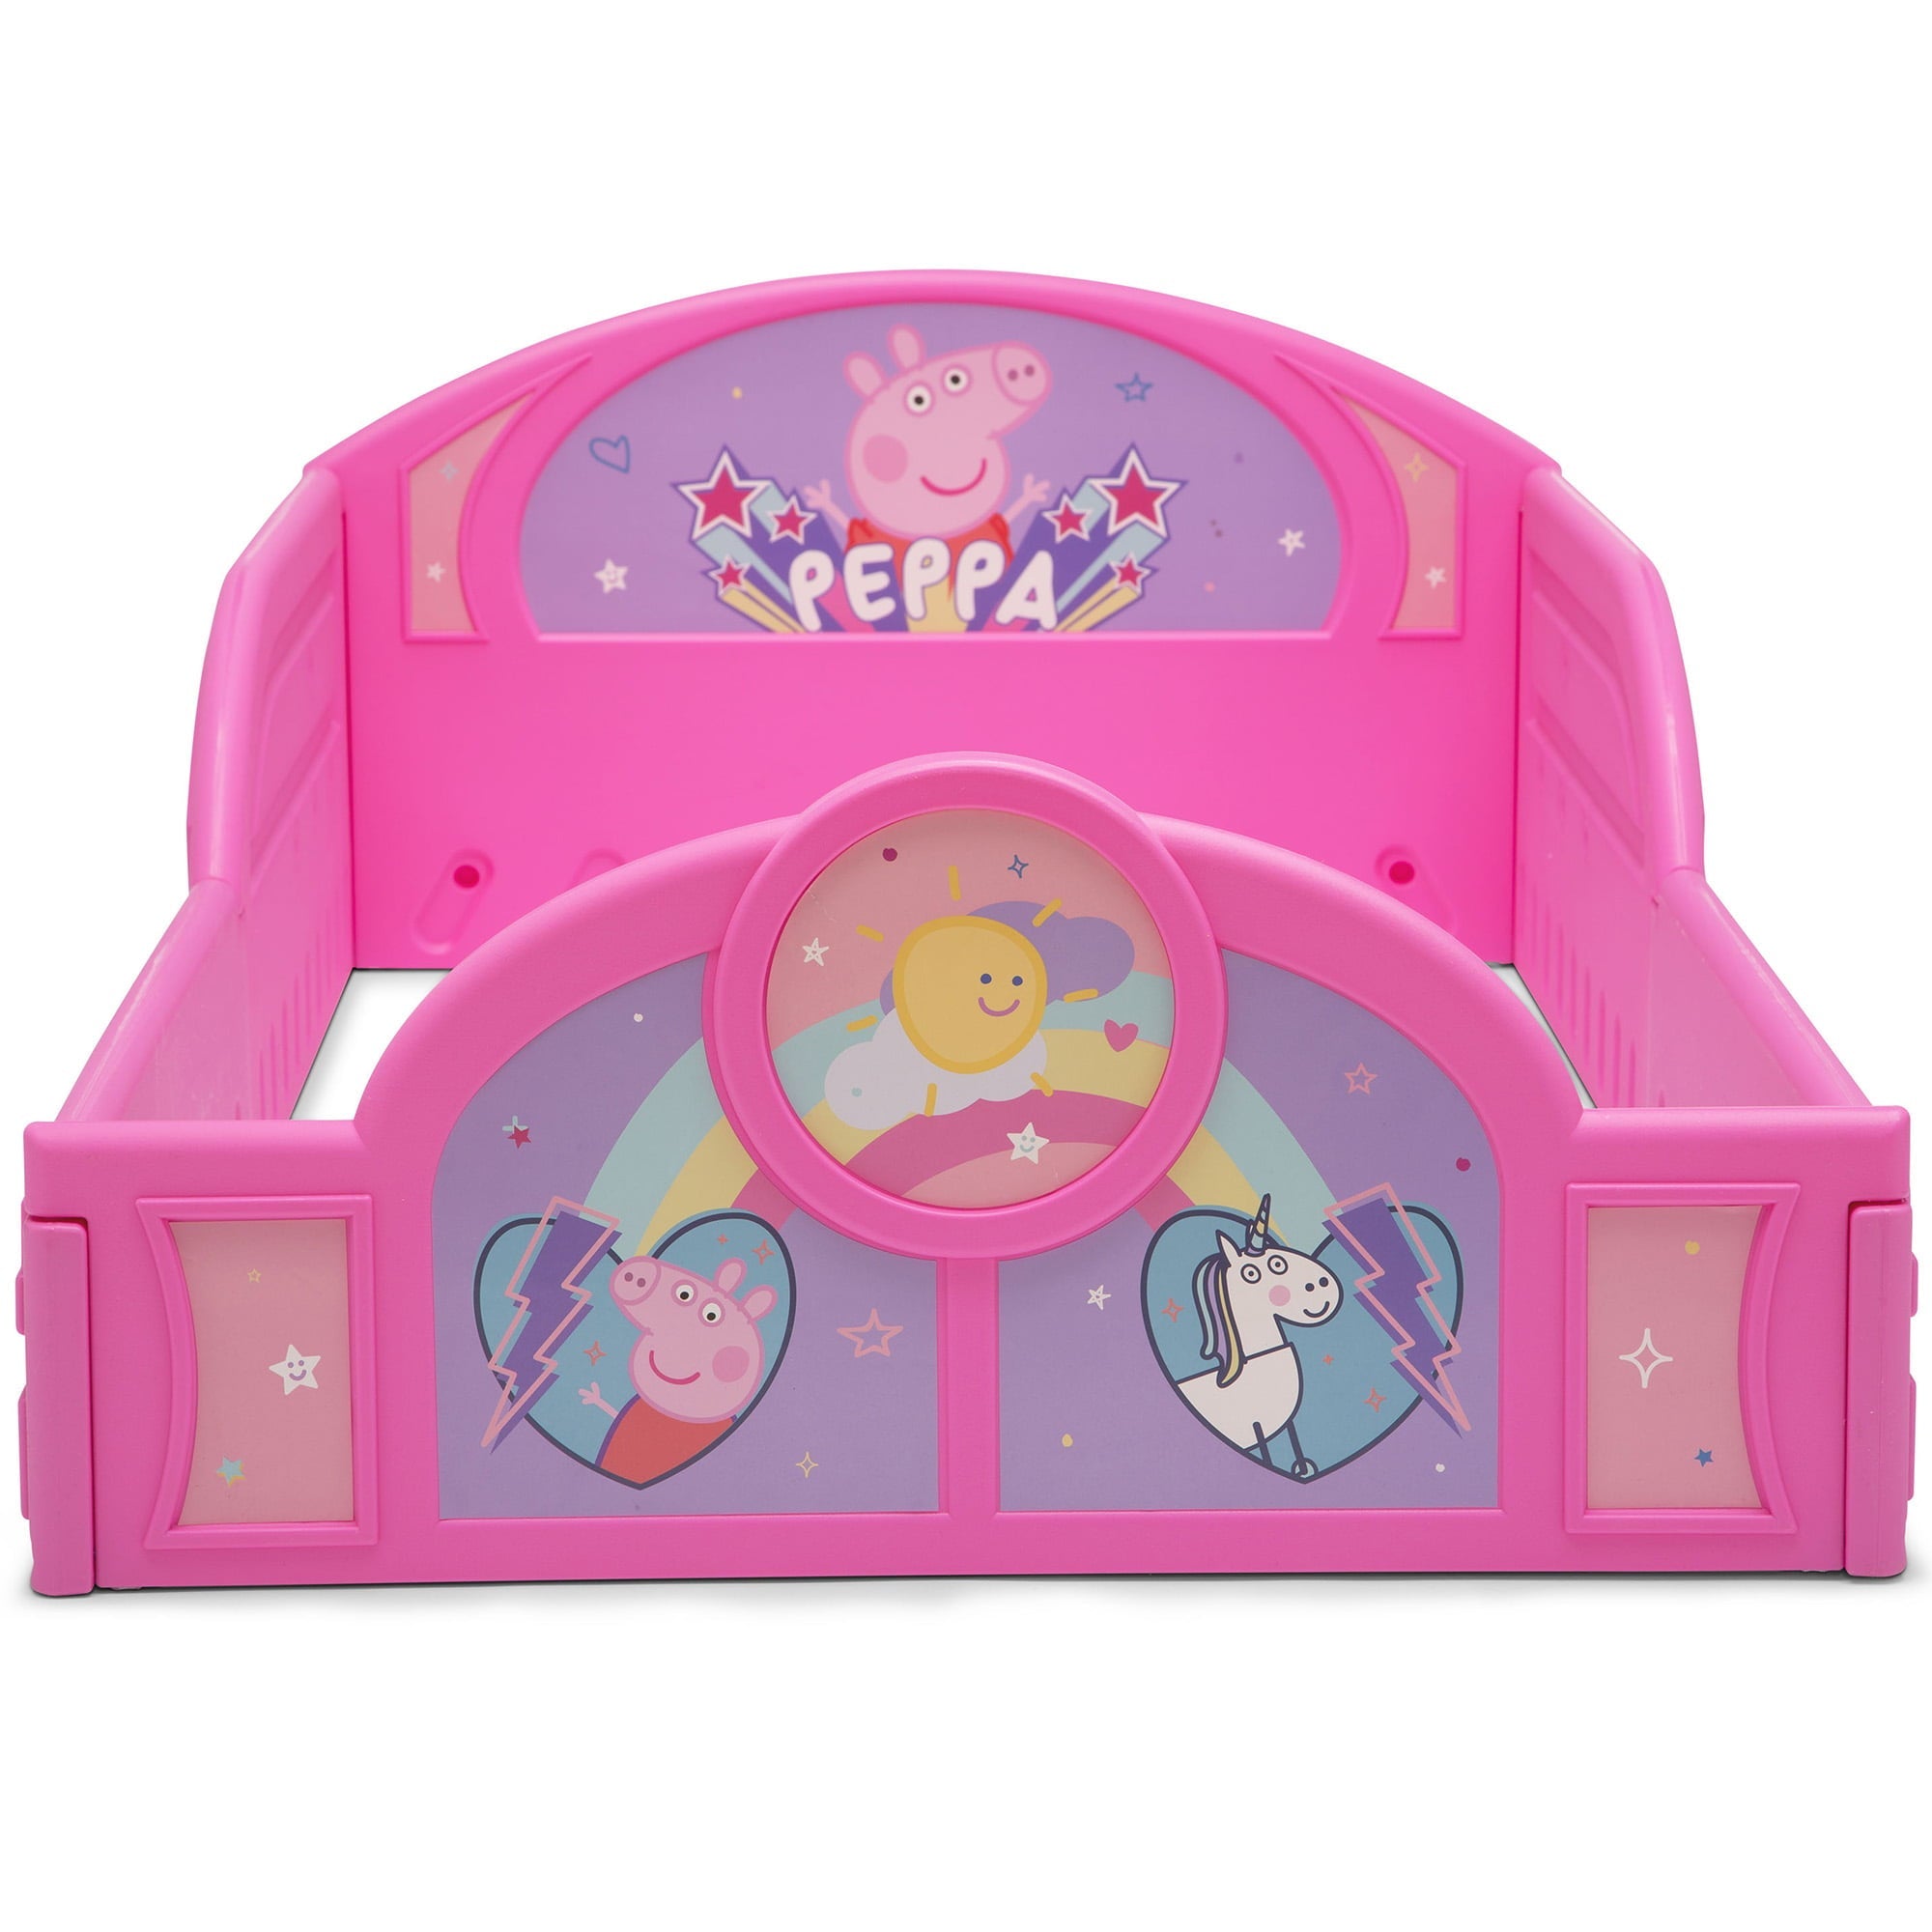 Peppa Pig Plastic Sleep and Play Toddler Bed by Delta Children